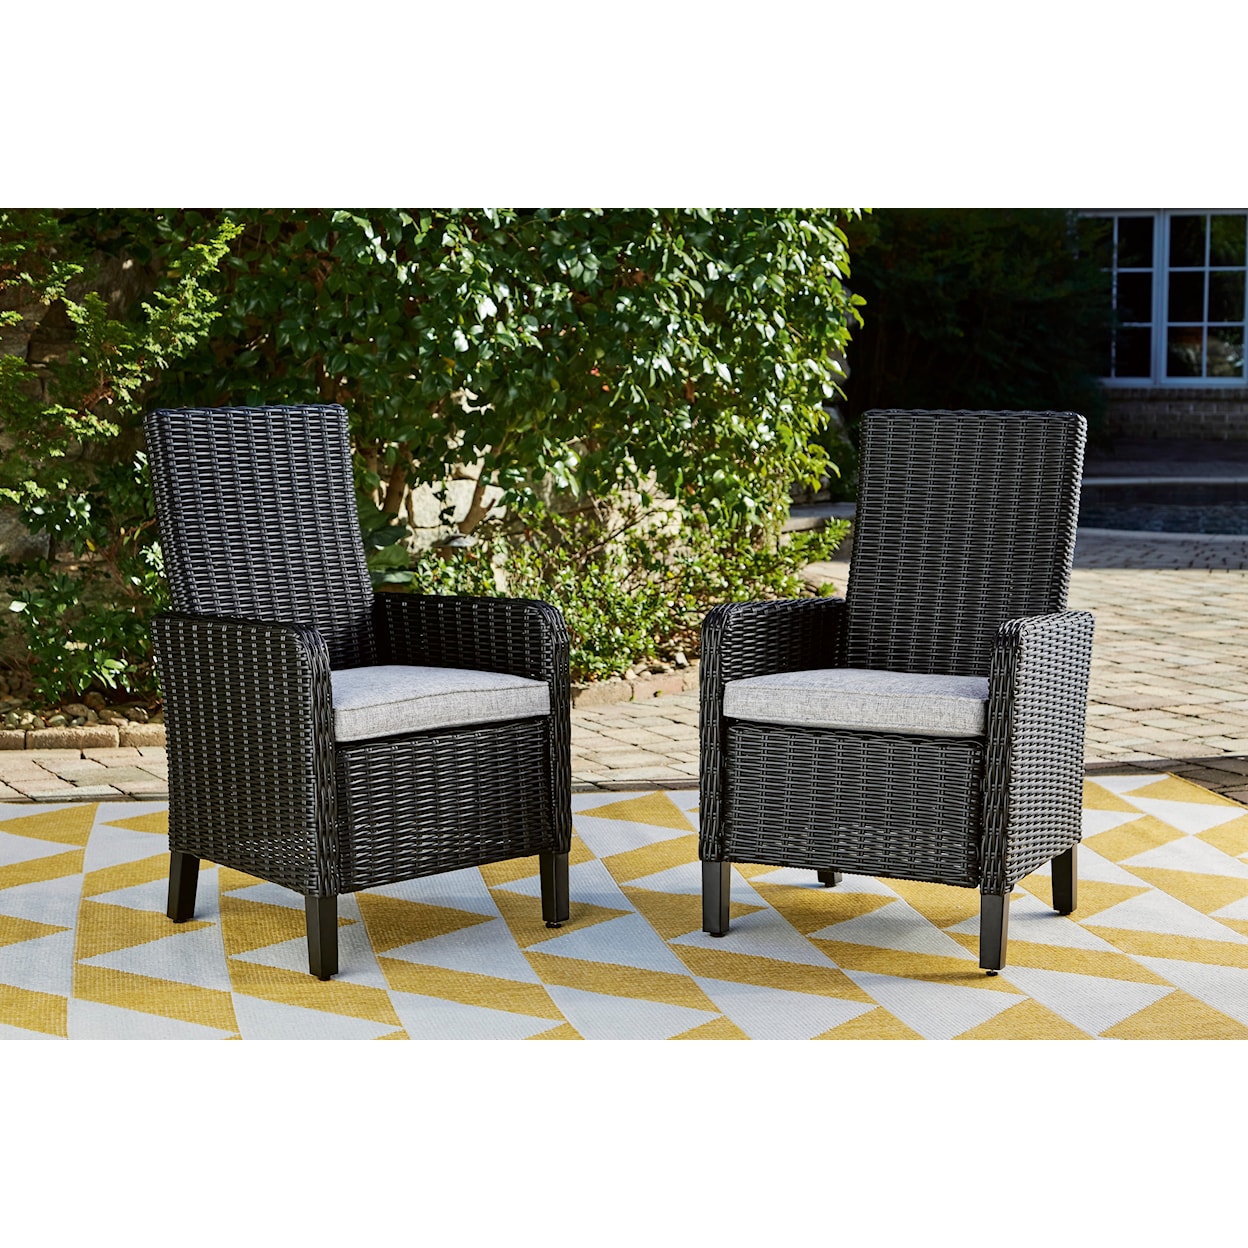 Ashley Signature Design Beachcroft Set of 2 Arm Chairs with Cushion